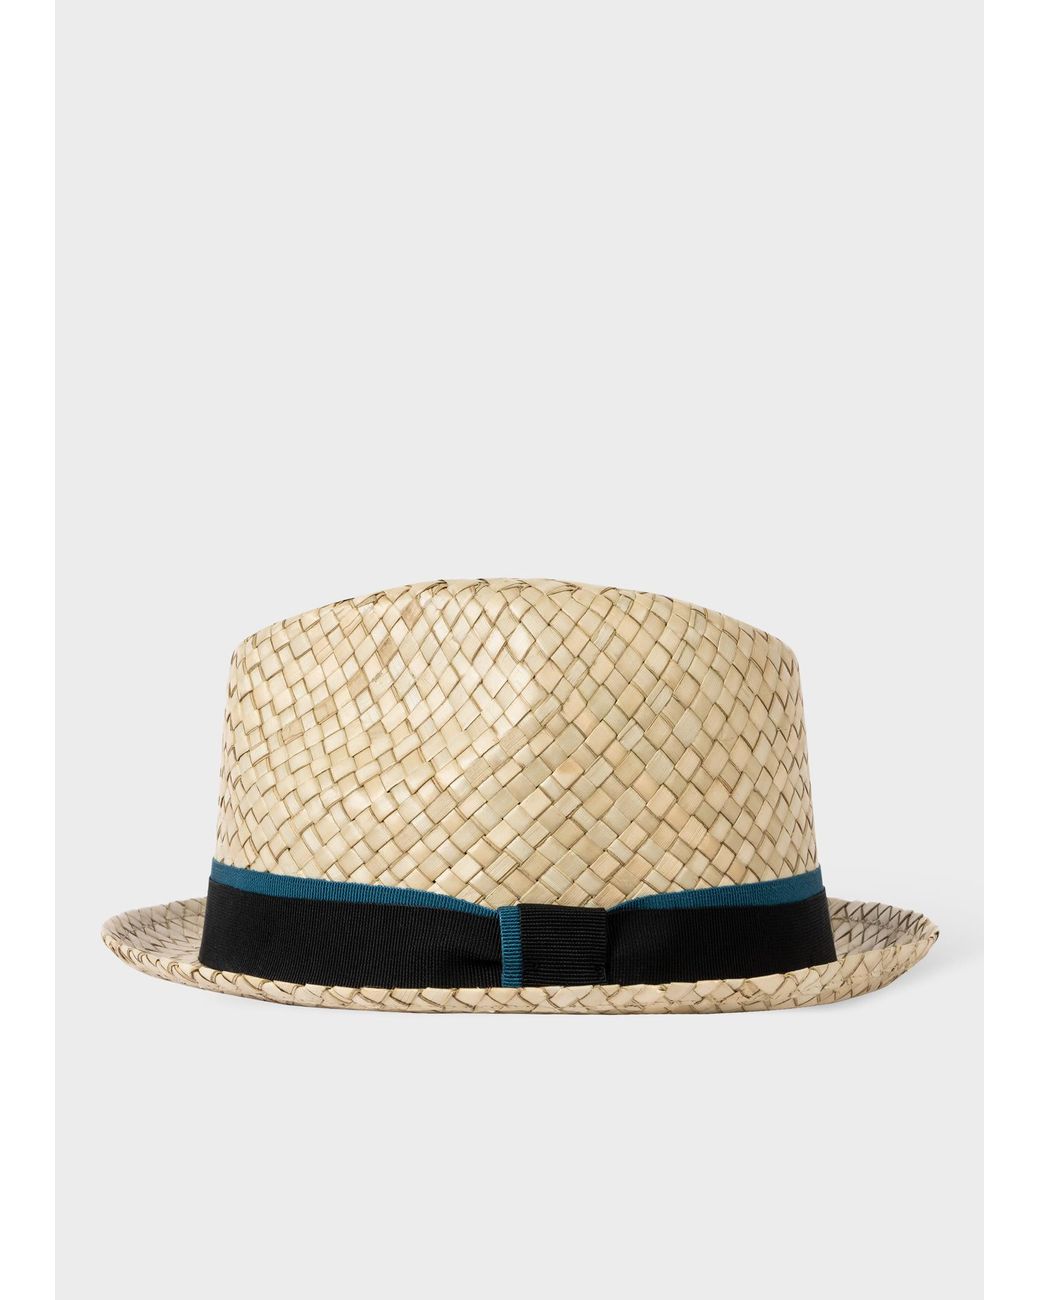 Paul Smith Tan Woven Trilby Straw Hat in Natural for Men | Lyst UK